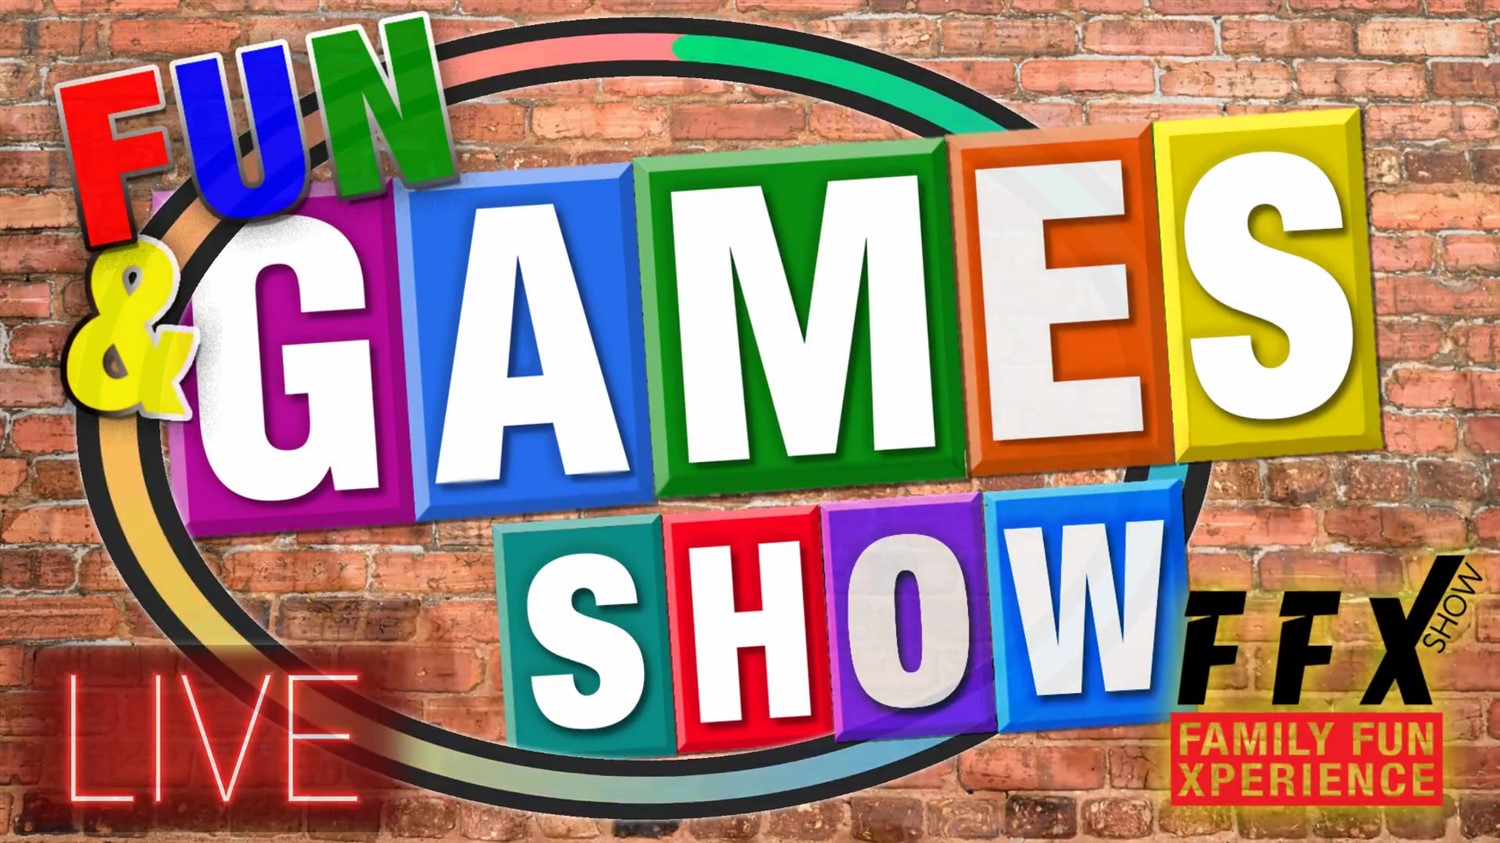 FUN & GAMES SHOW! 5 Star Fun for the whole family! on Oct 20, 19:00@FFX Theatre - Pick a seat, Buy tickets and Get information on Family Fun Xperience tickets.ffxshow.org